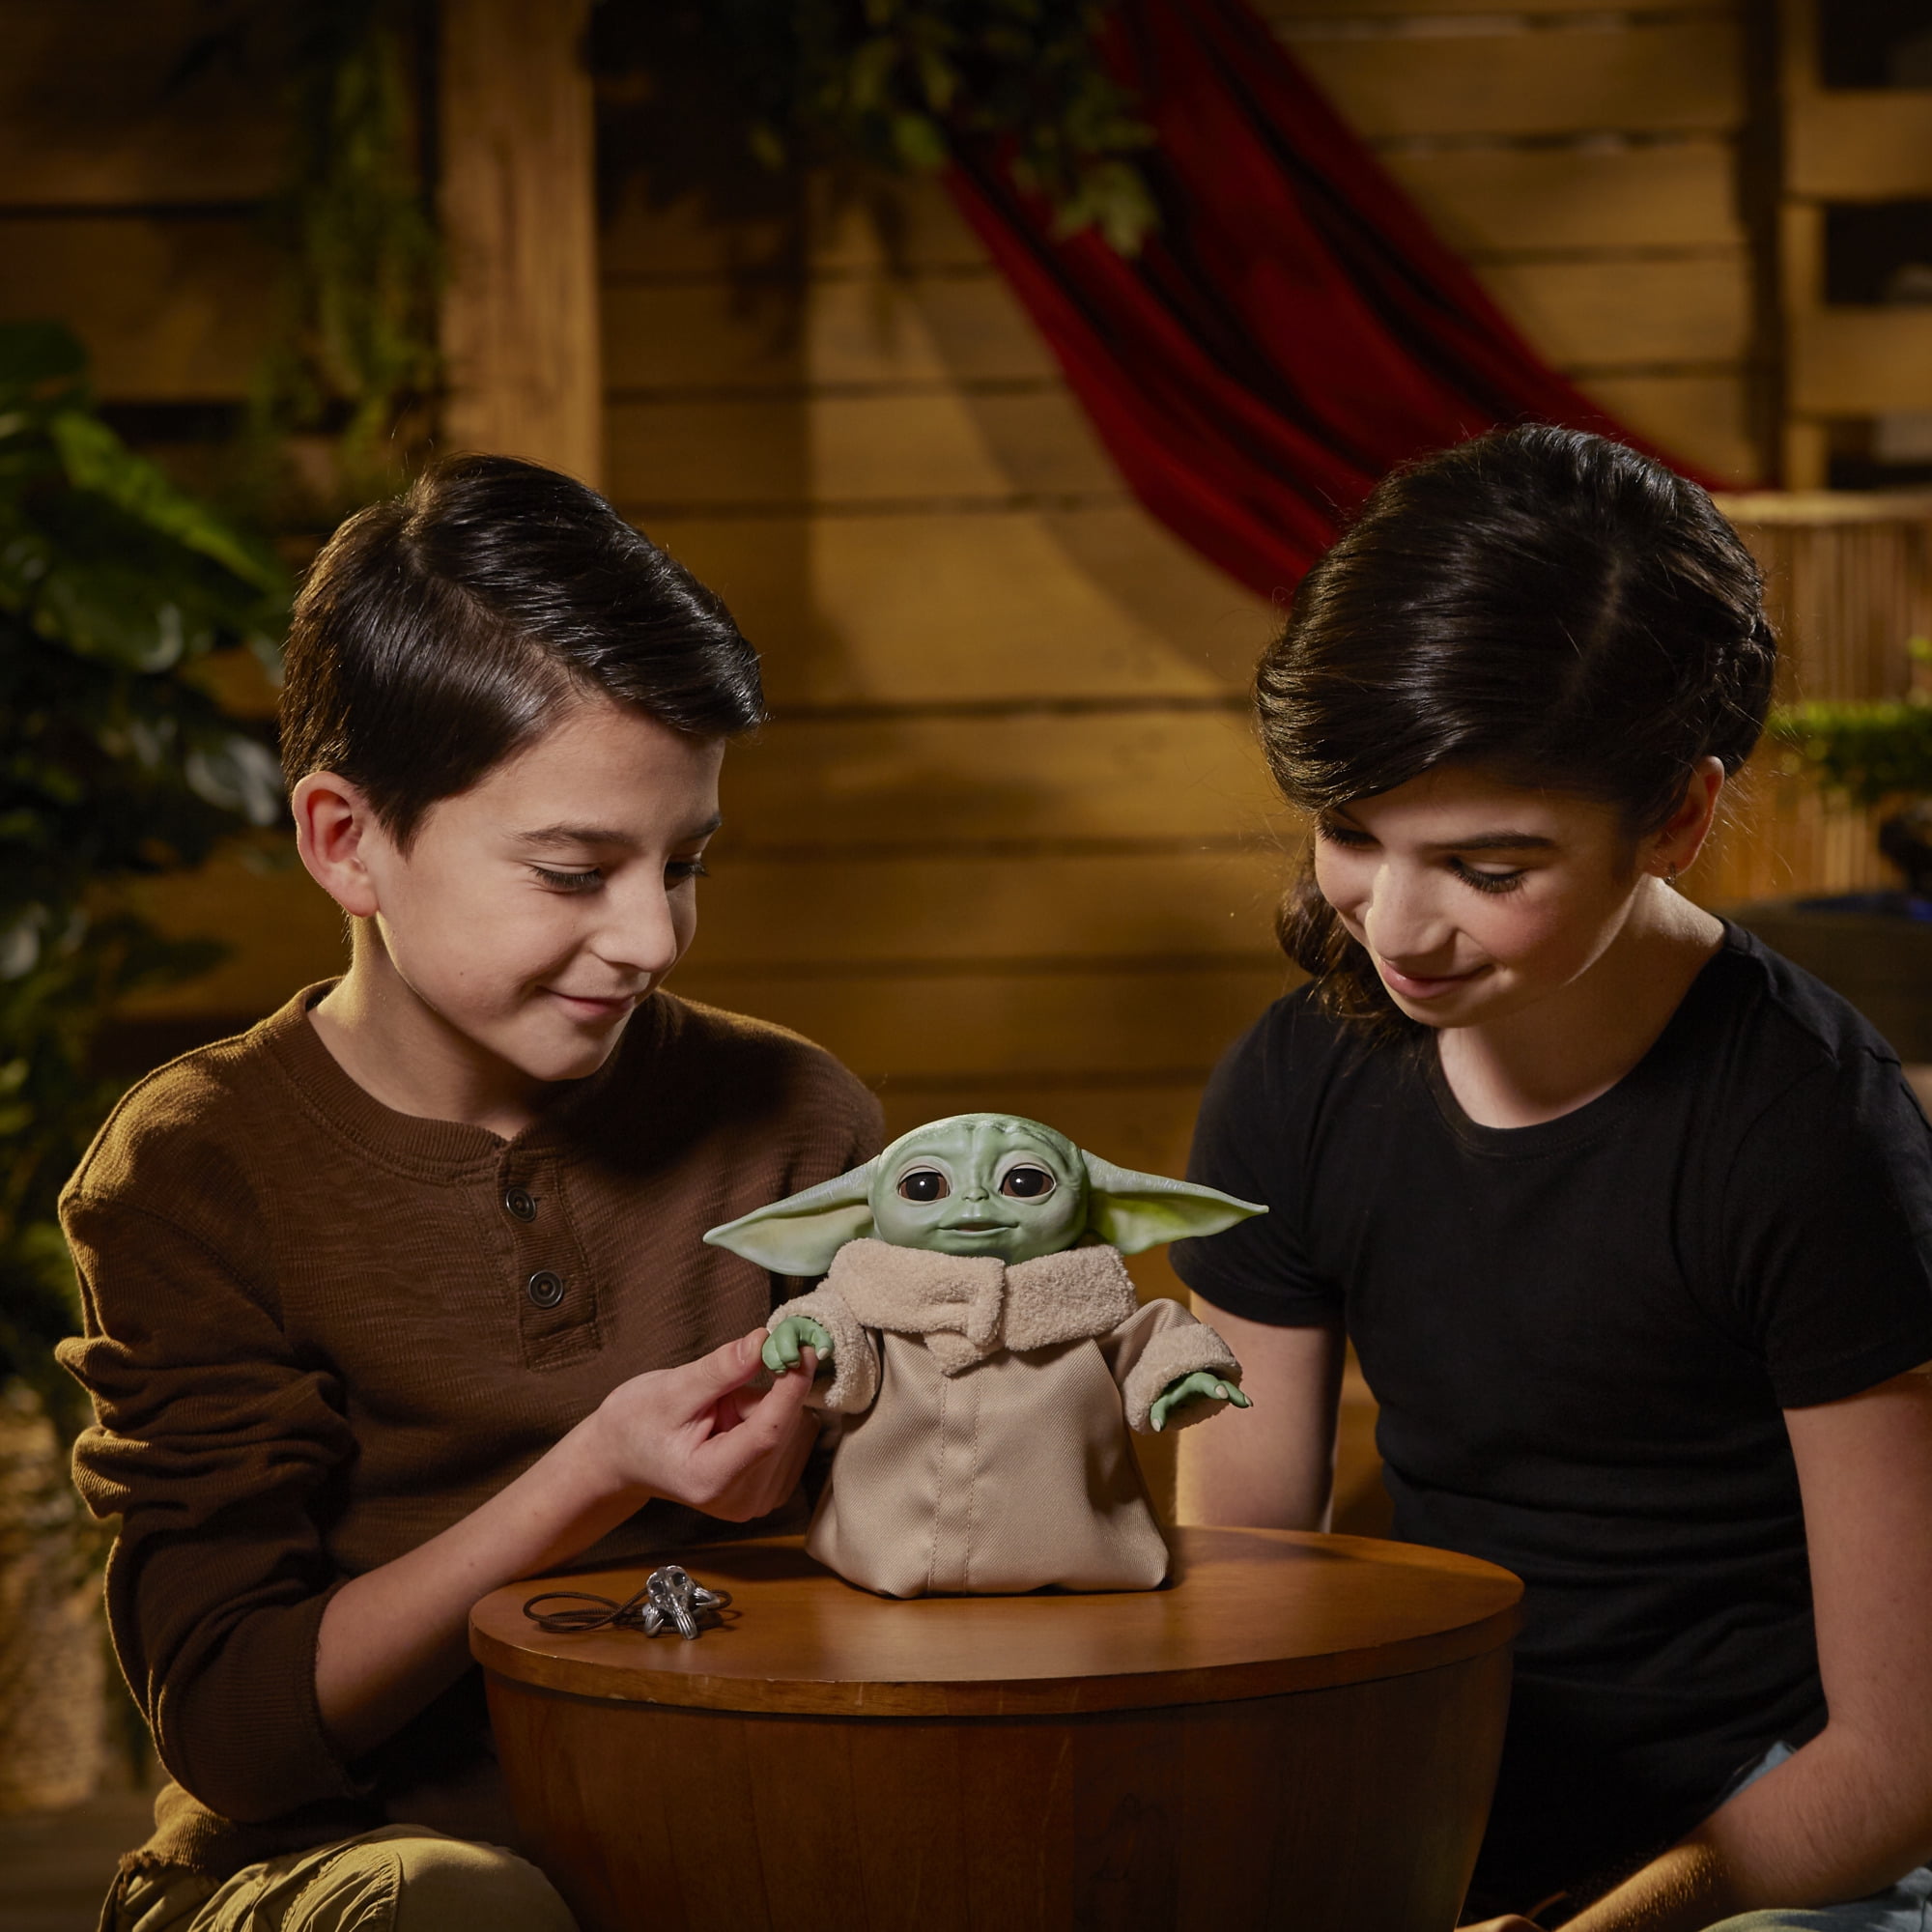 Details about   Star Wars The Child Animatronic Edition 7.2-Inch-Tall Toy by Hasbro with Over 25 